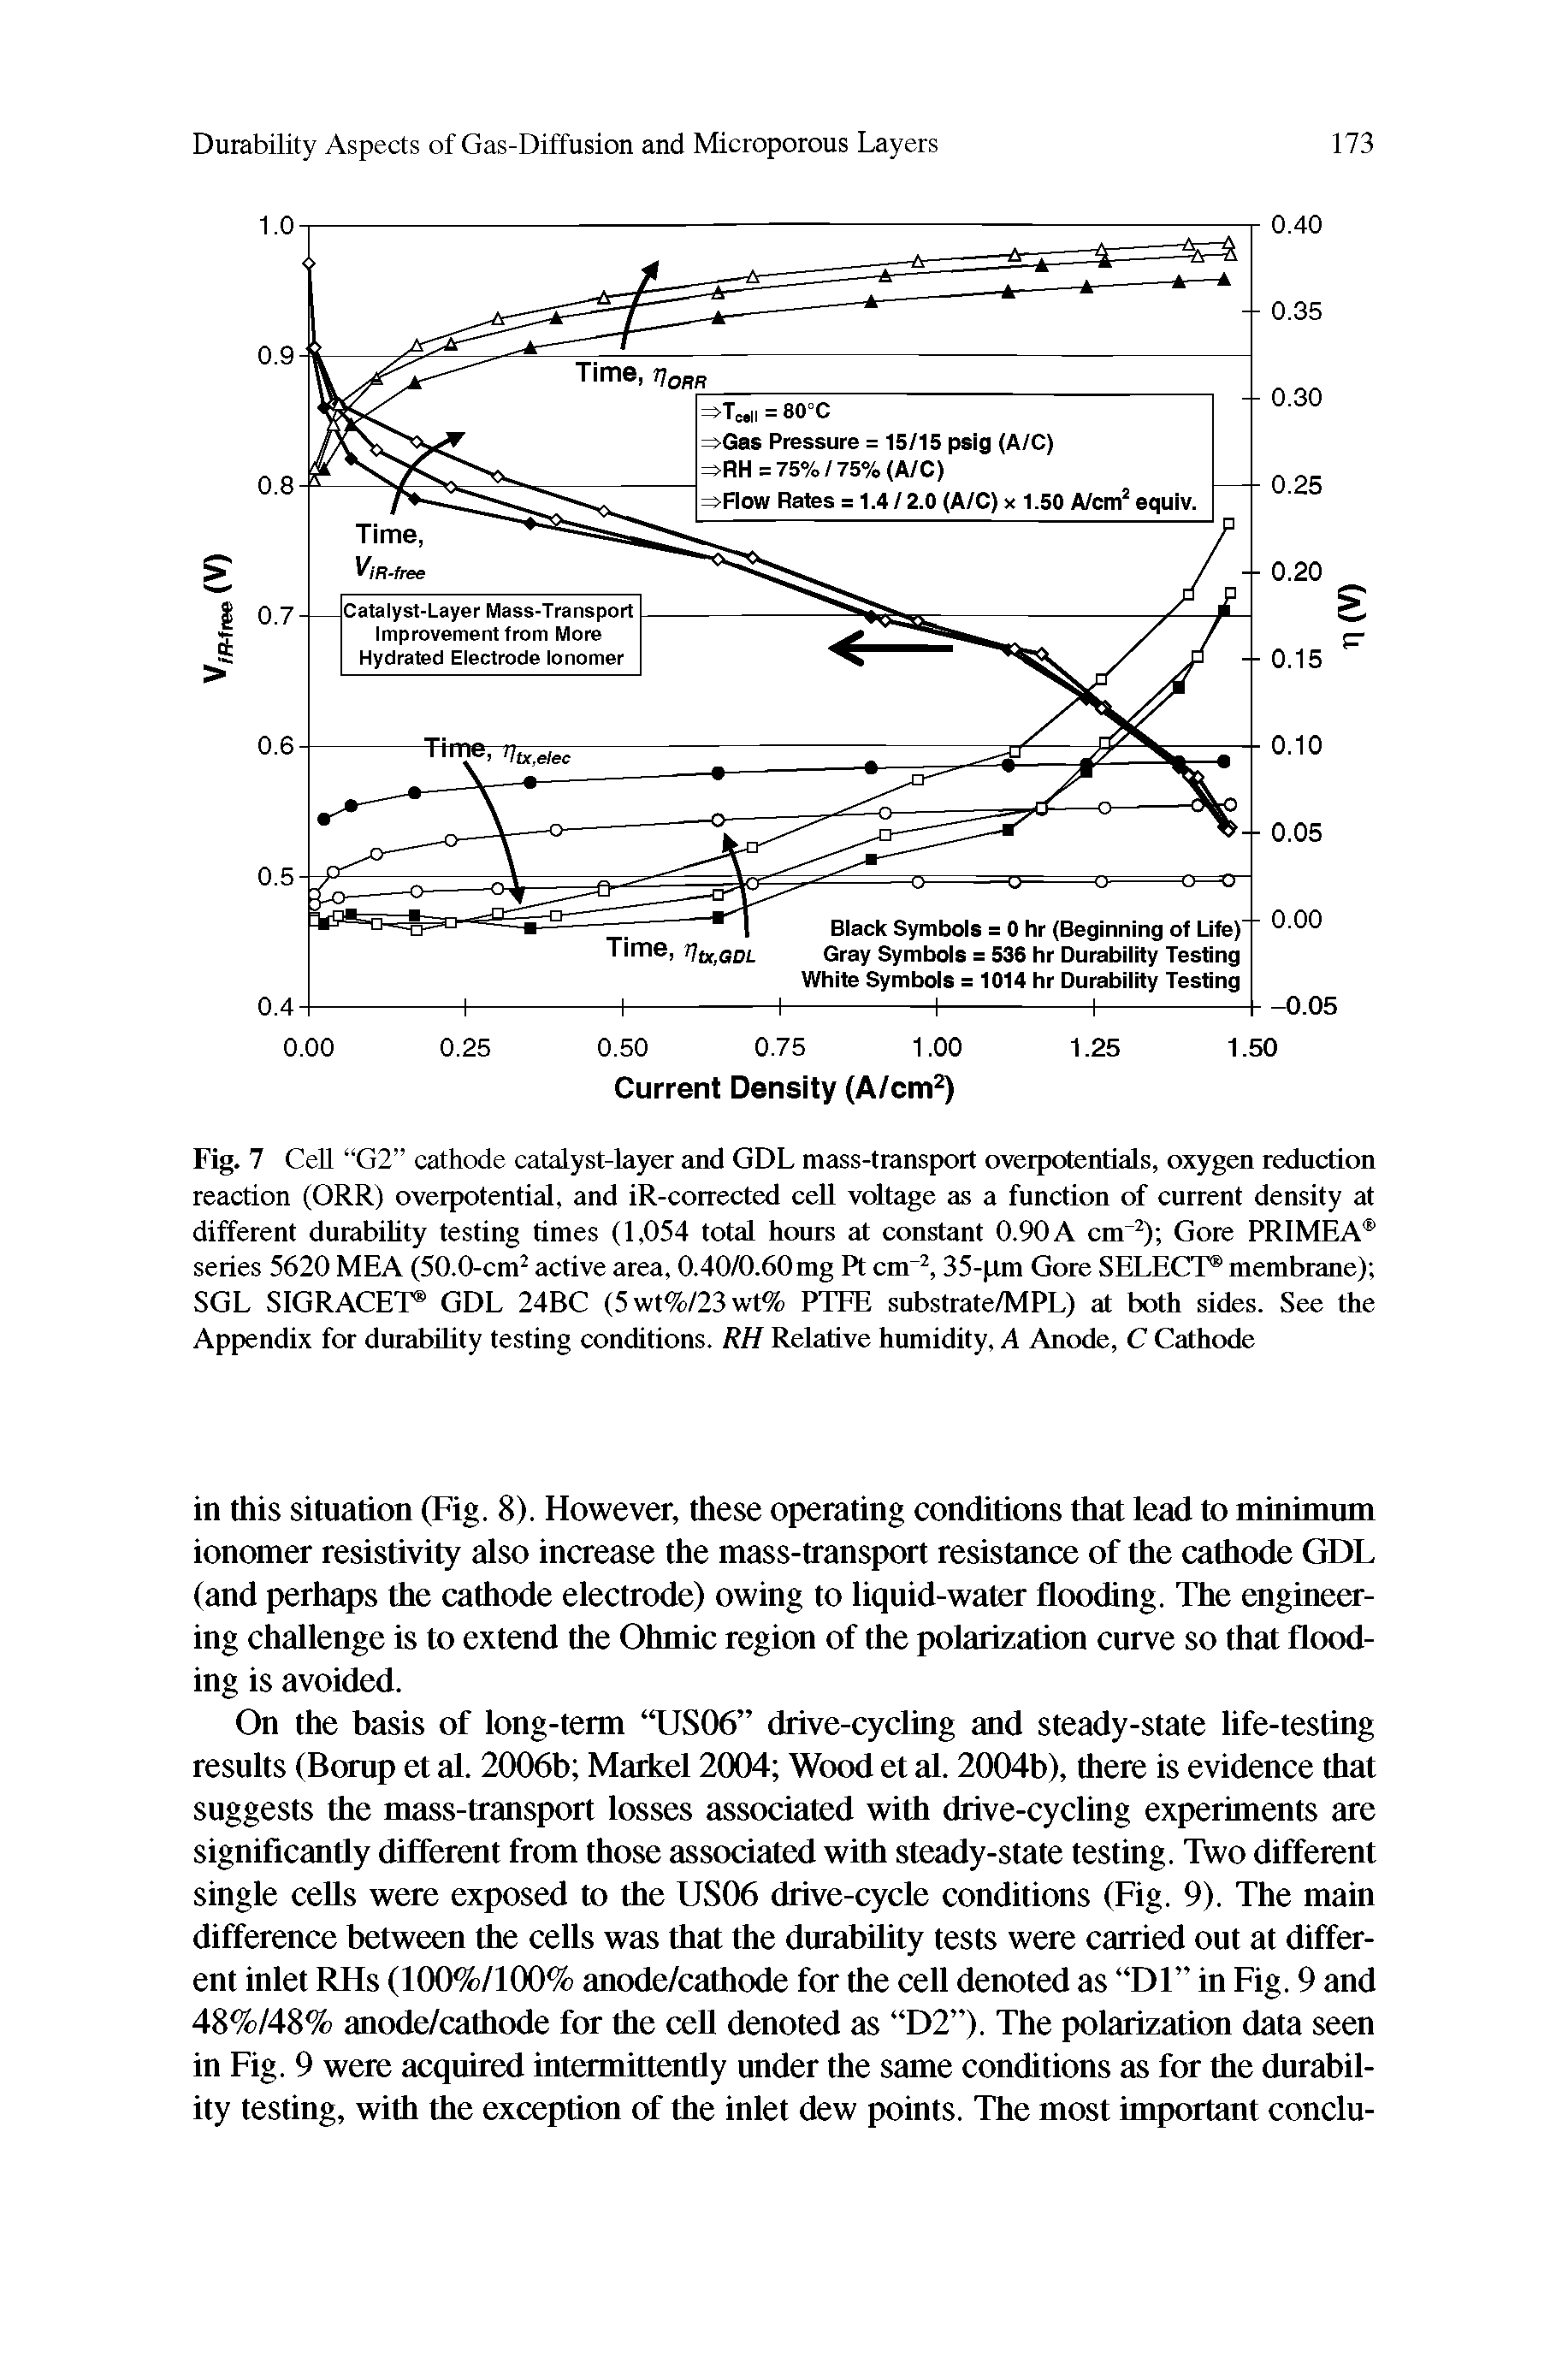 Fig. 7 CeU G2 cathode catalyst-layer and GDL mass-transport overpotentials, oxygen reduction reaction (ORR) overpotential, and iR-corrected cell voltage as a function of current density at different durability testing times (1,054 total hours at constant 0.90 A cm Gore PRIMEA series 5620 MEA (50.0-cm active area, 0.40/0.60mg Pt cm, 35- am Gore SELECT membrane) SGL SIGRACET GDL 24BC (5wt%/23wt% PTFE substrate/MPL) at both sides. See the Appendix for durability testing conditions. RH Relative humidity, A Anode, C Cathode...